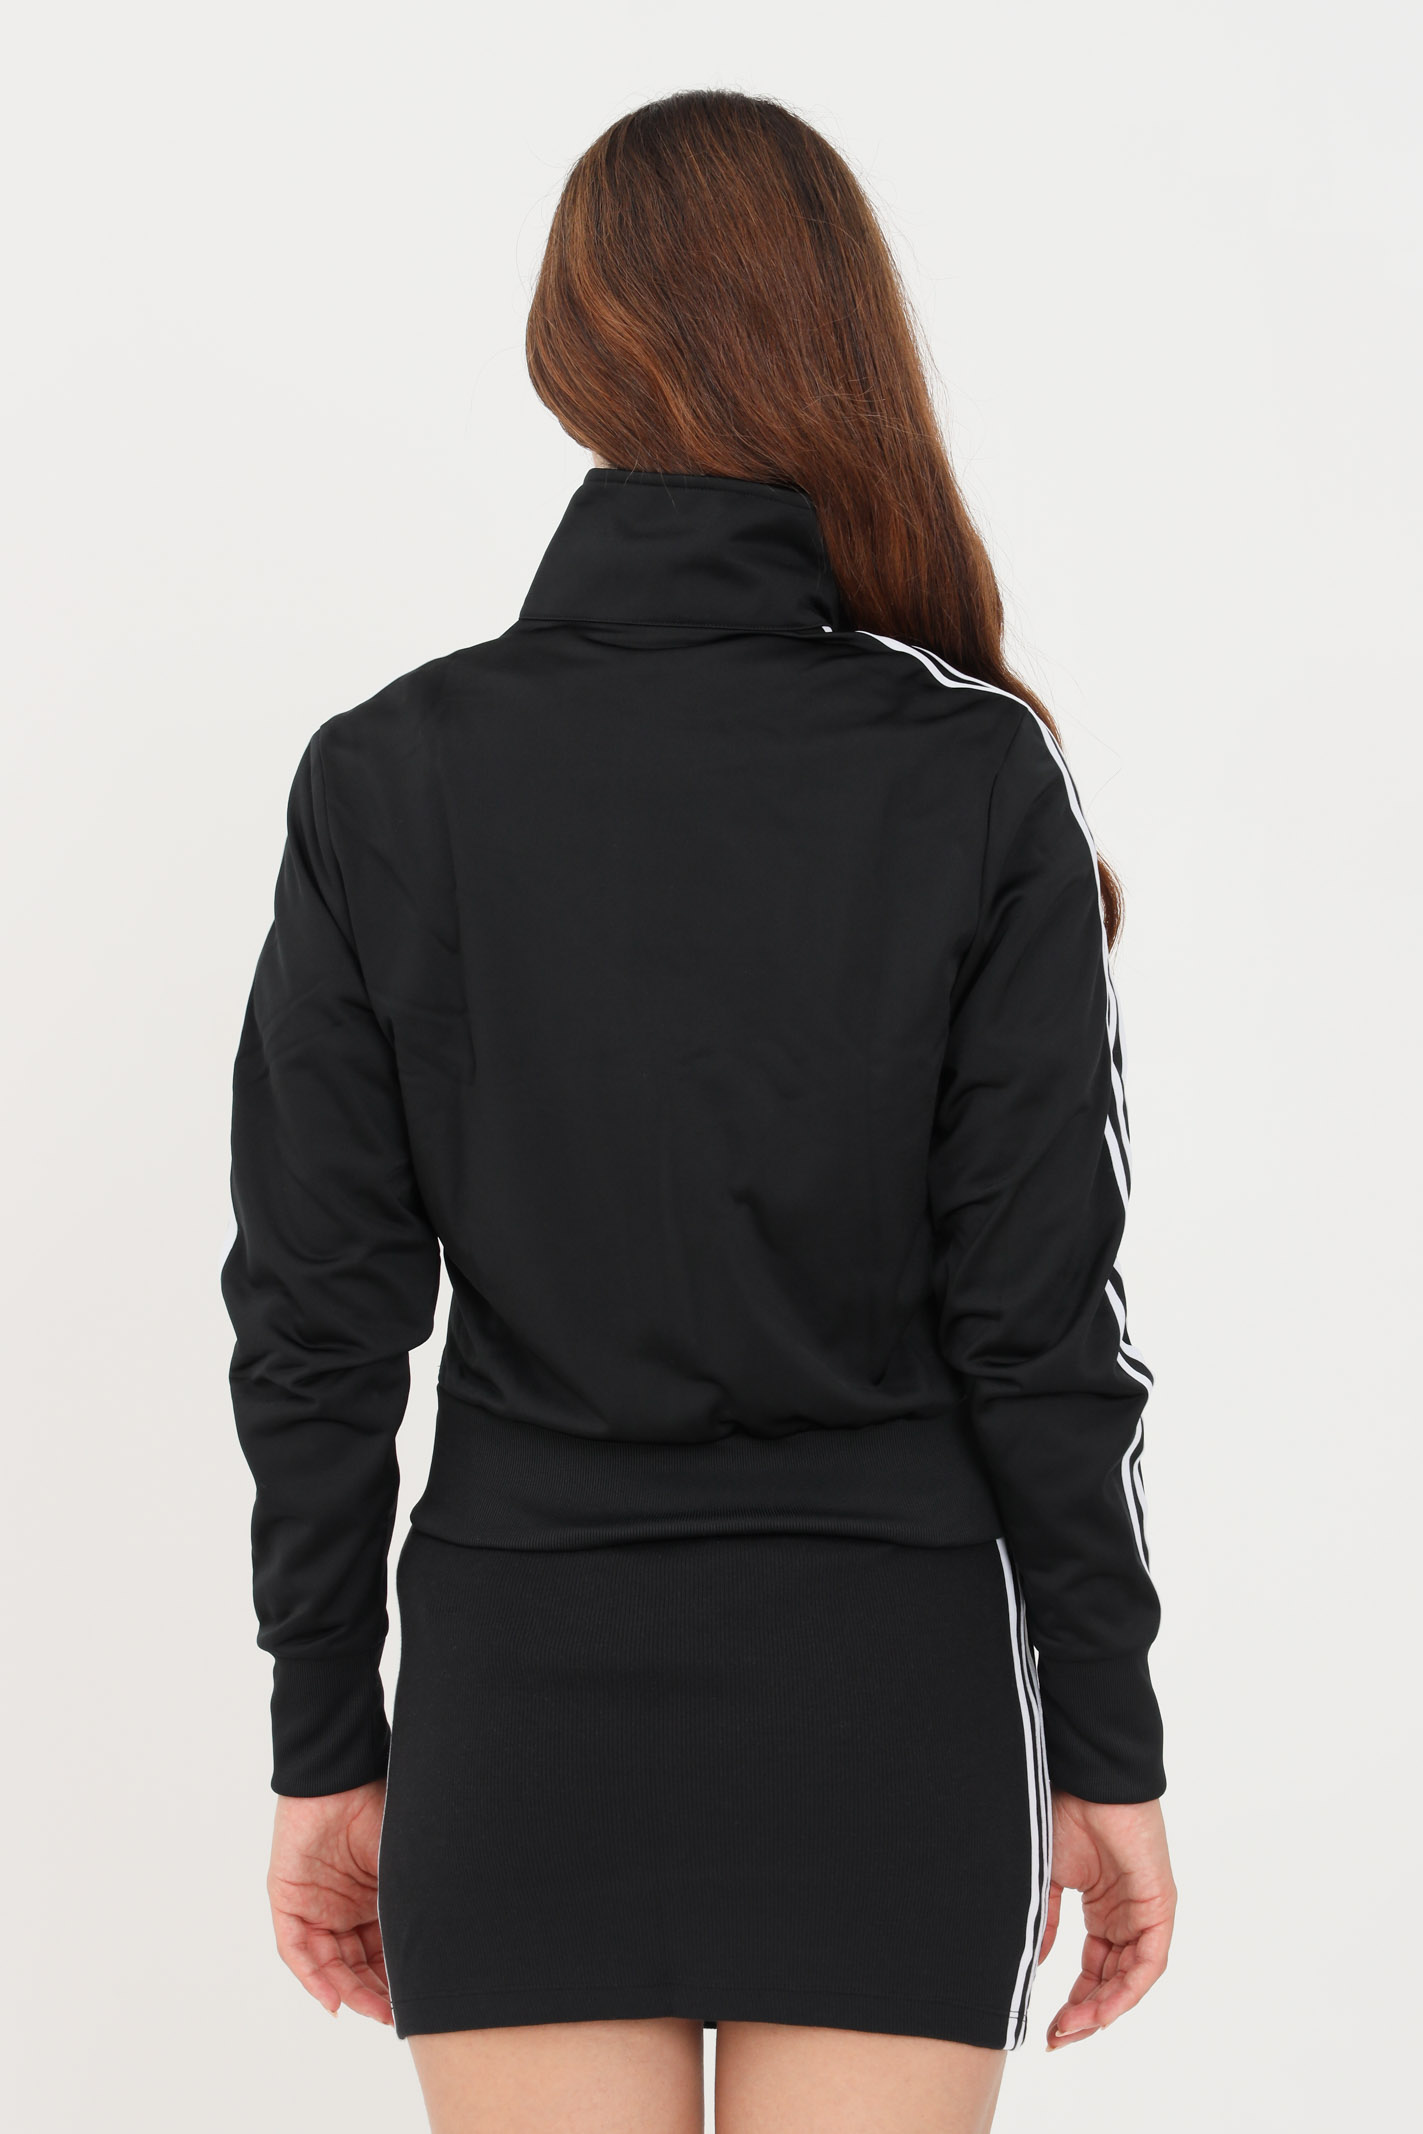 Black sweatshirt for women with full zip and side bands ADIDAS | GN2817.